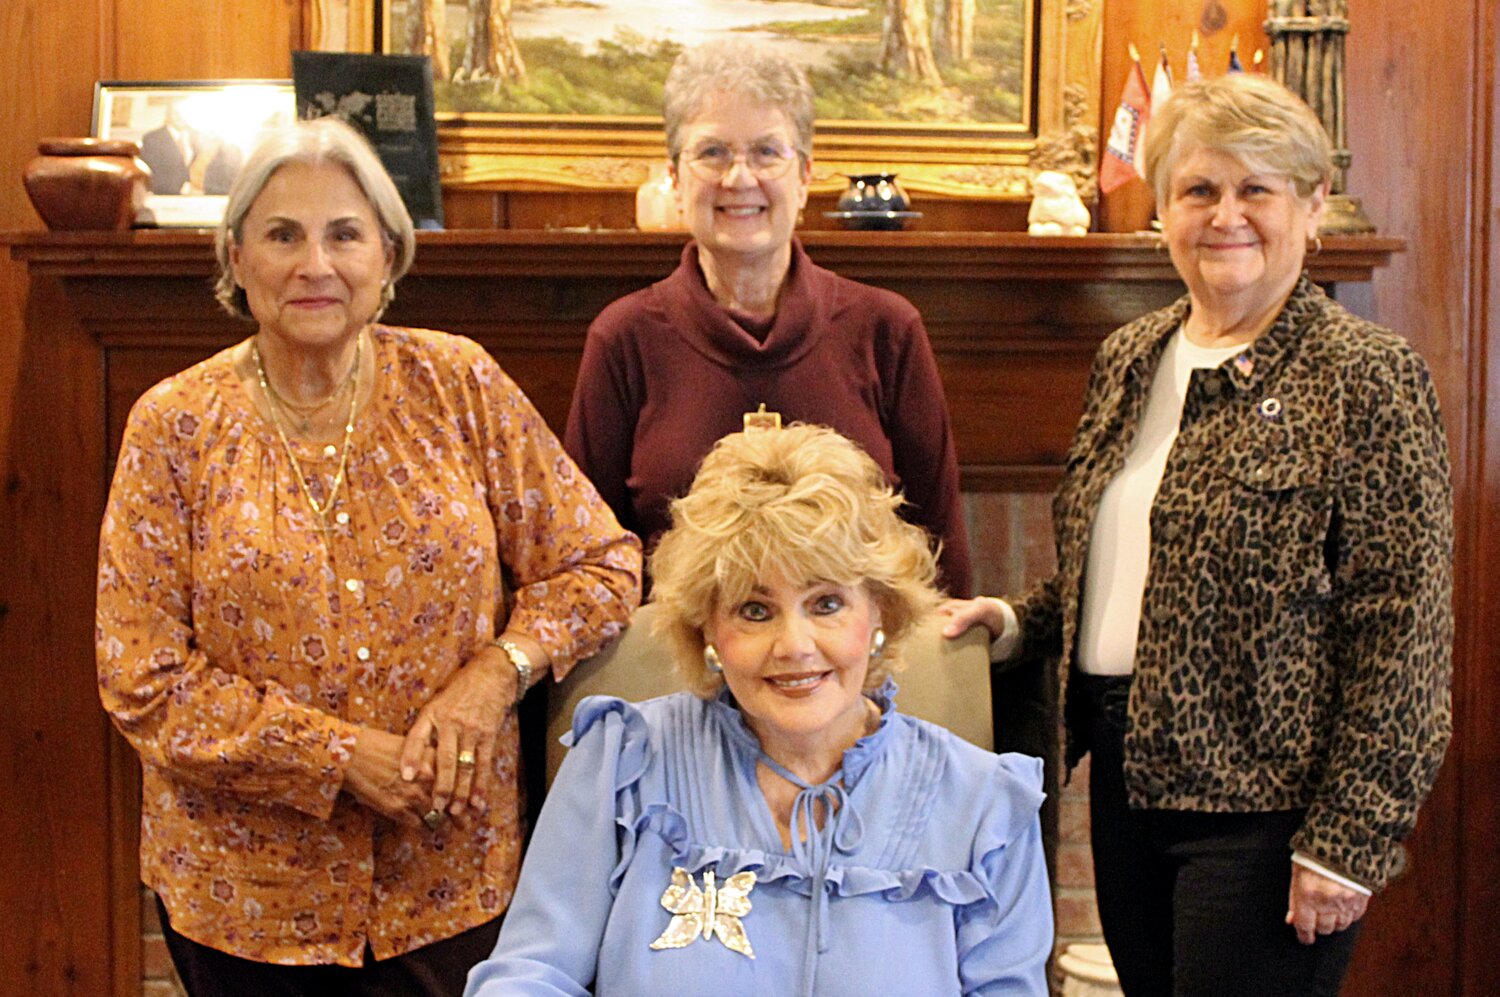 Madison Mayor Mary Hawkins Butler signs proclamations for the Annandale Chapter of the DAR with members Kathy Laurent, Myra Cook and Beth Herring in attendance.